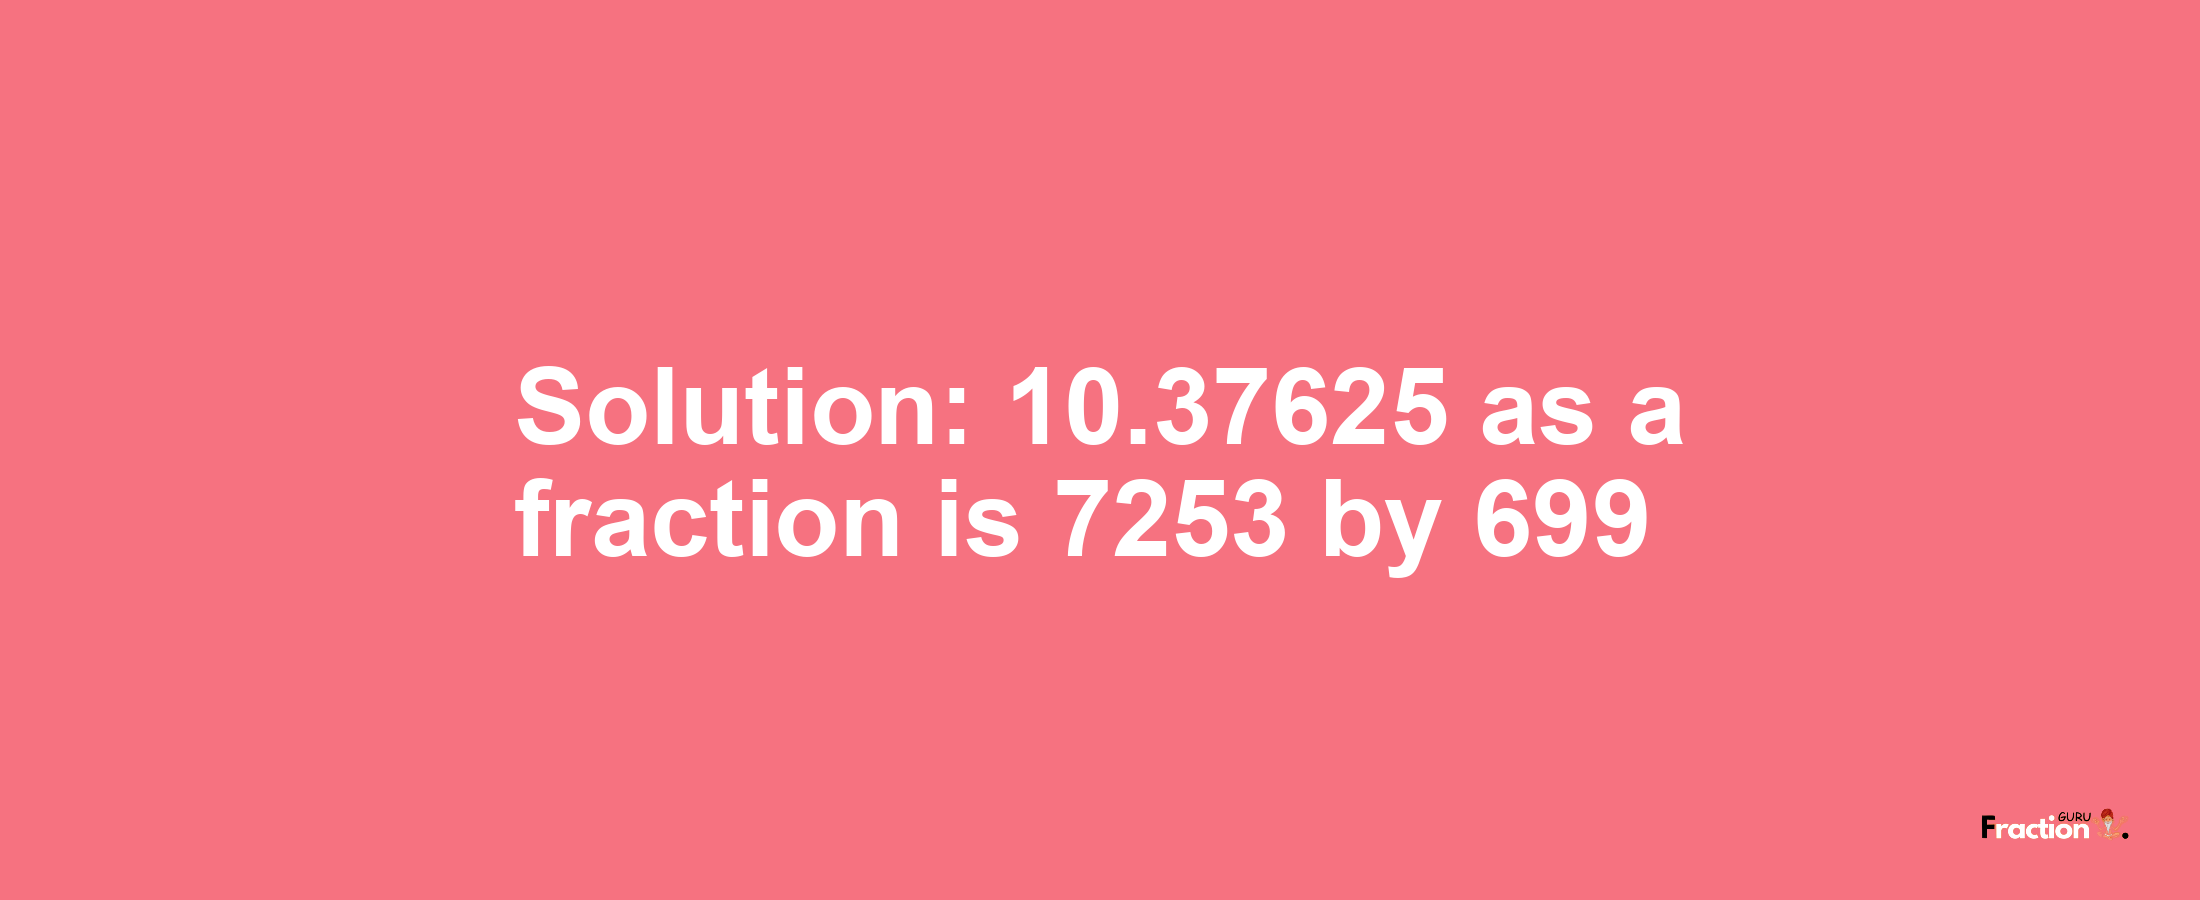 Solution:10.37625 as a fraction is 7253/699